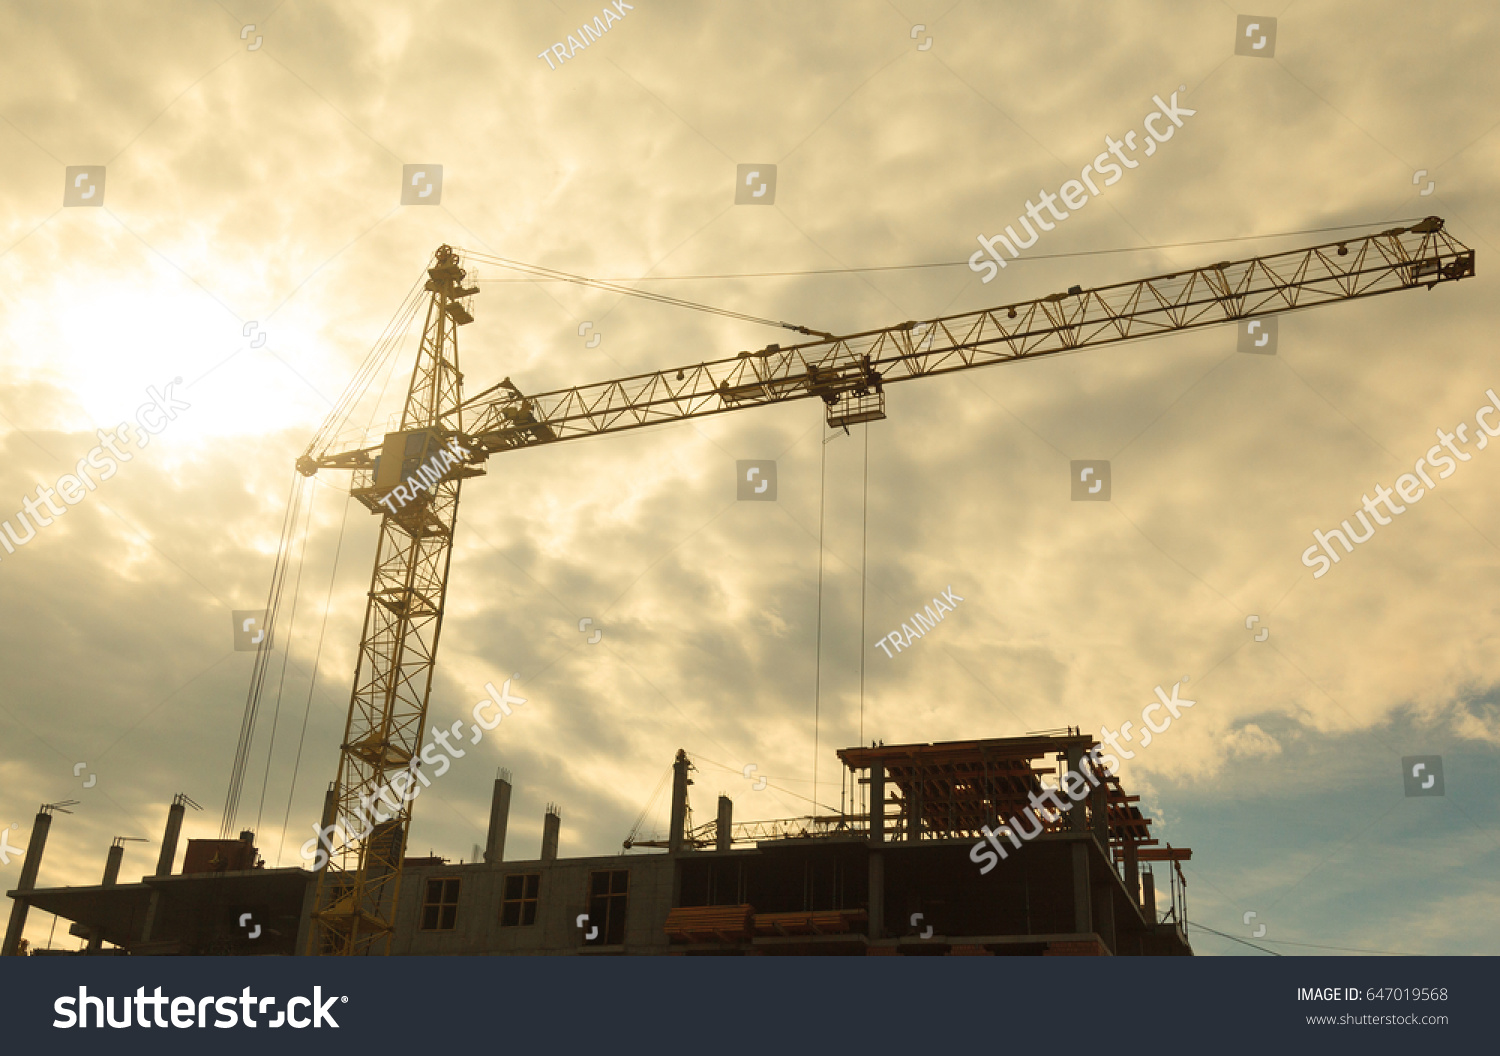 Building crane orange in the background of the sky and the object under construction #647019568